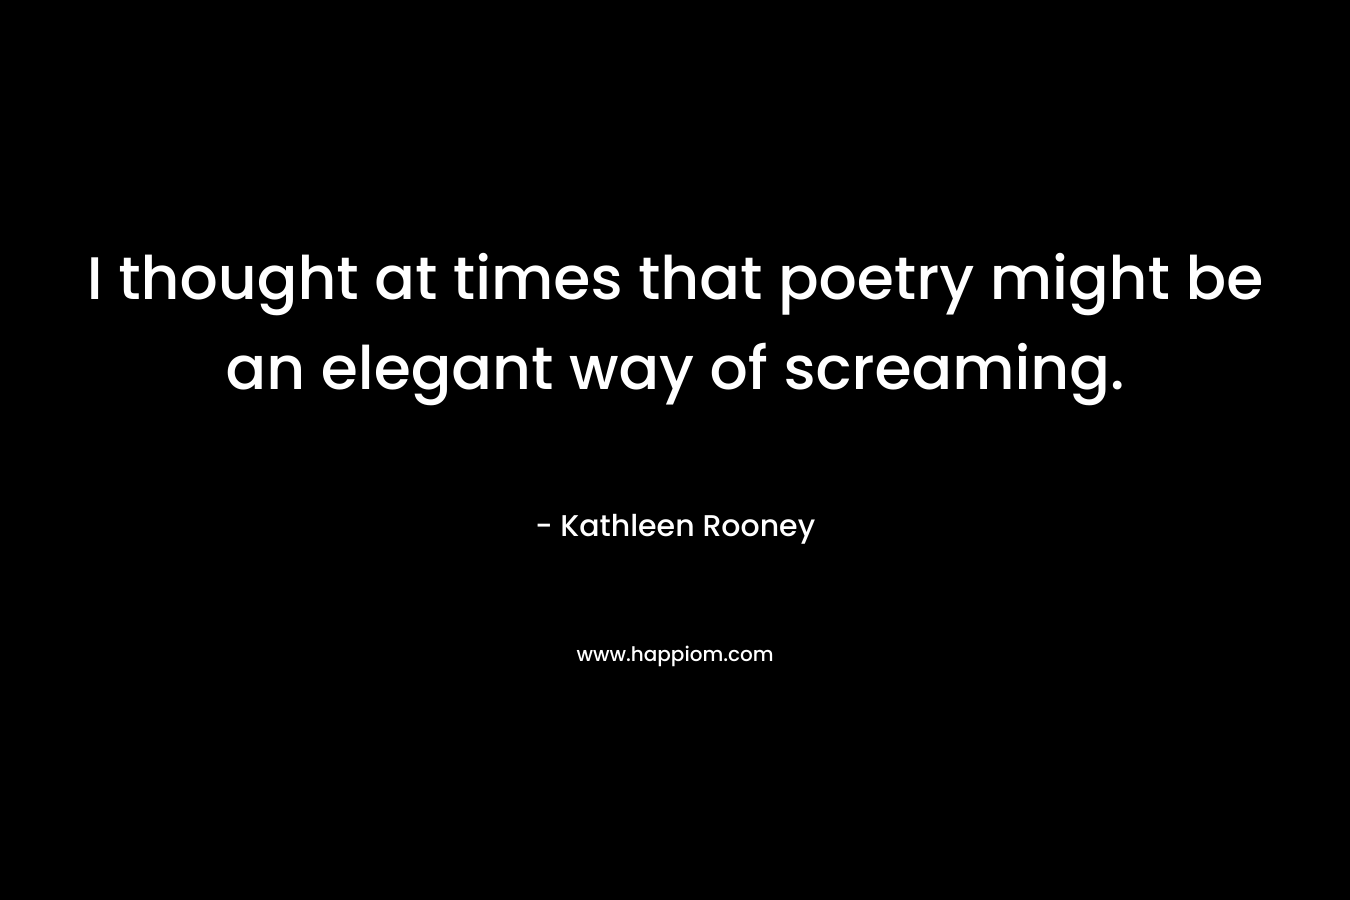 I thought at times that poetry might be an elegant way of screaming. – Kathleen Rooney